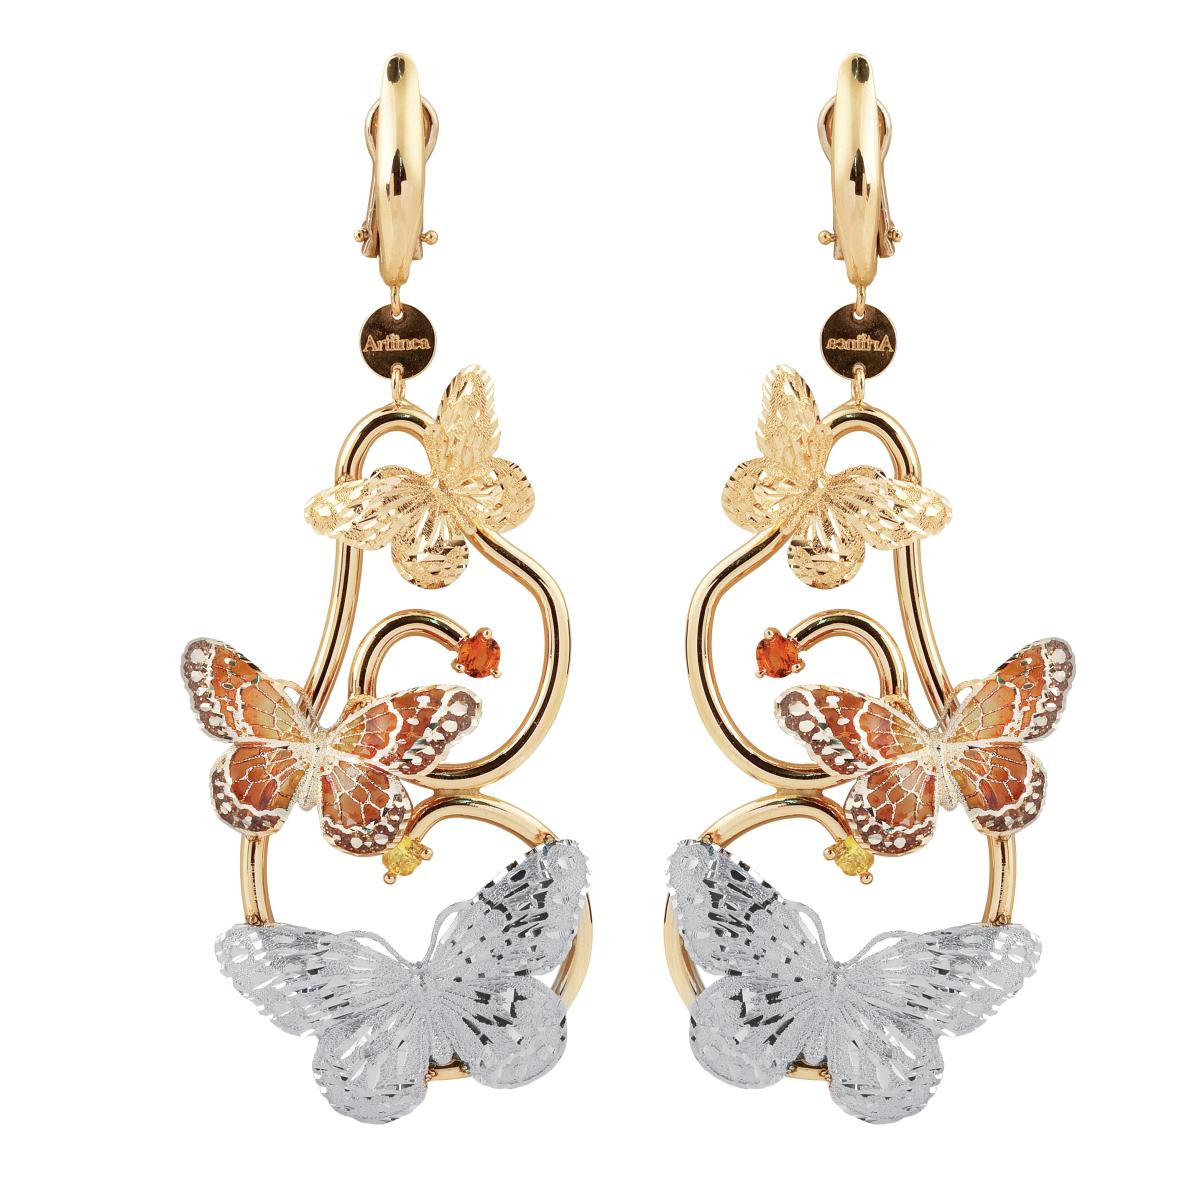 3 Butterflies earrings in 18kt two-tone gold, cathedral enamel and citrine stones - OCA296-MN